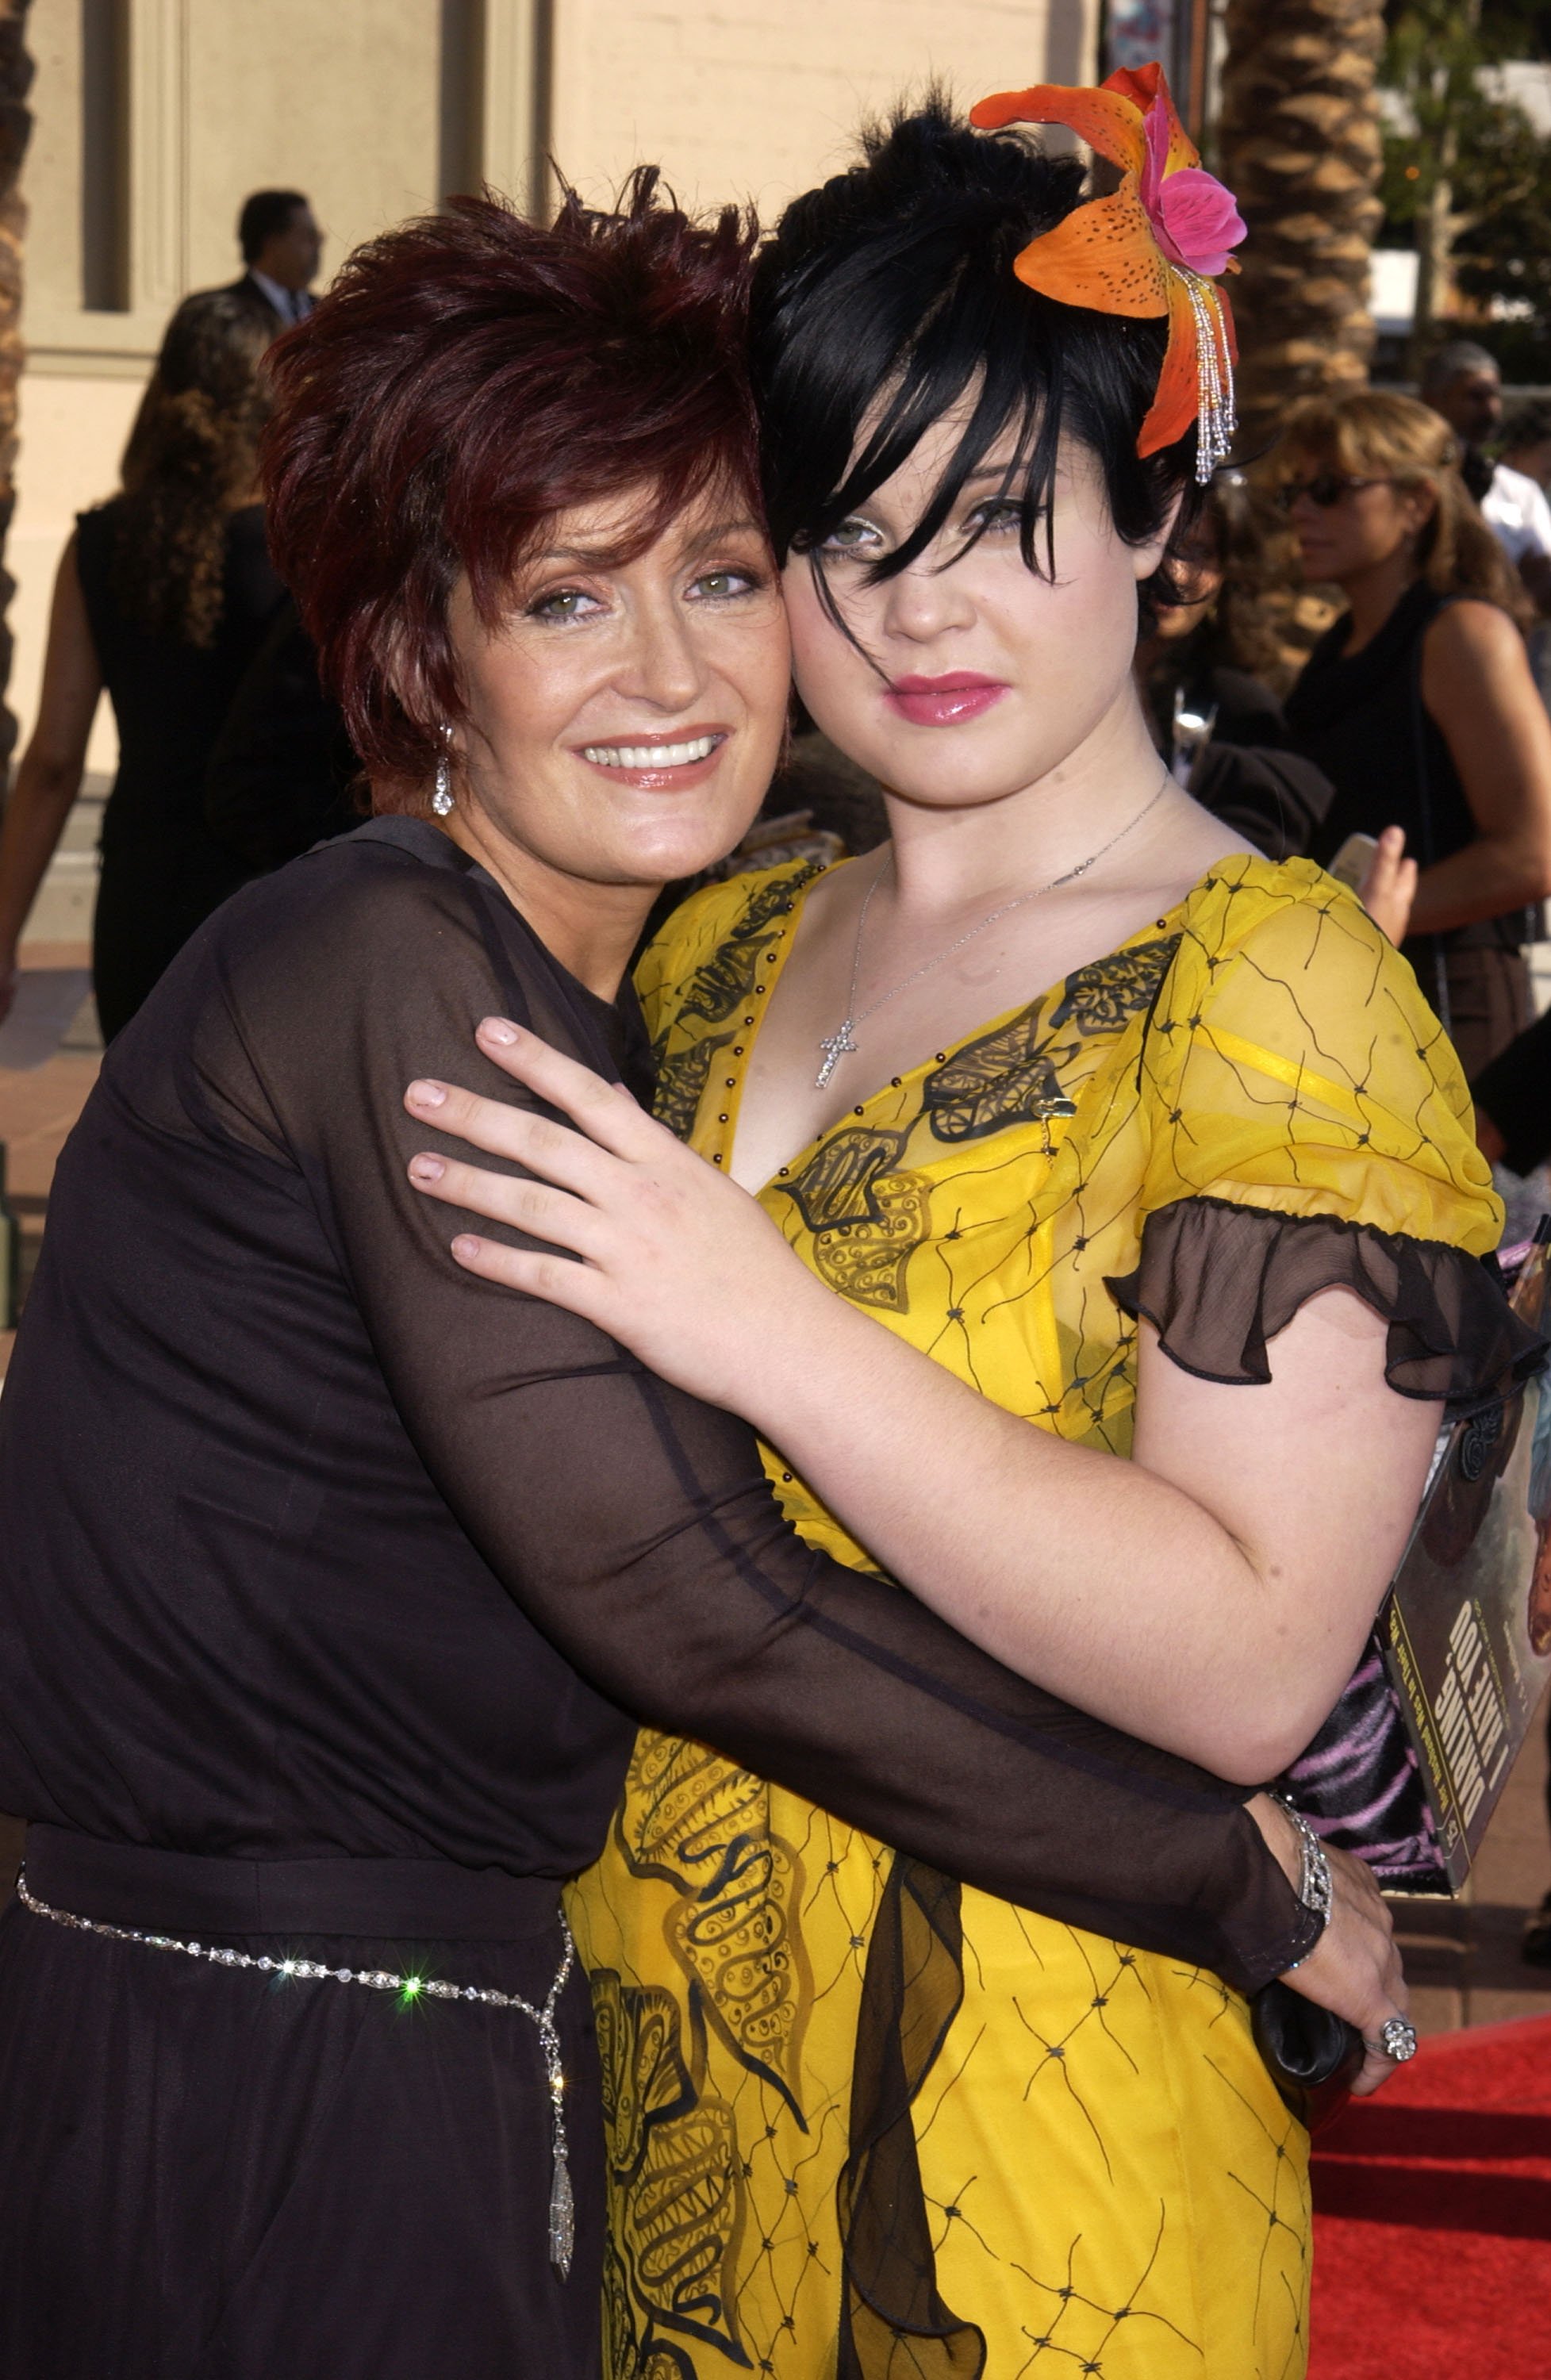 Sharon Osbourne and Kelly Osbourne during 2002 Creative Arts Emmy Awards - Arrivals at Shrine Auditorium in Los Angeles, California, United States in 2002 | Source: Getty Images 